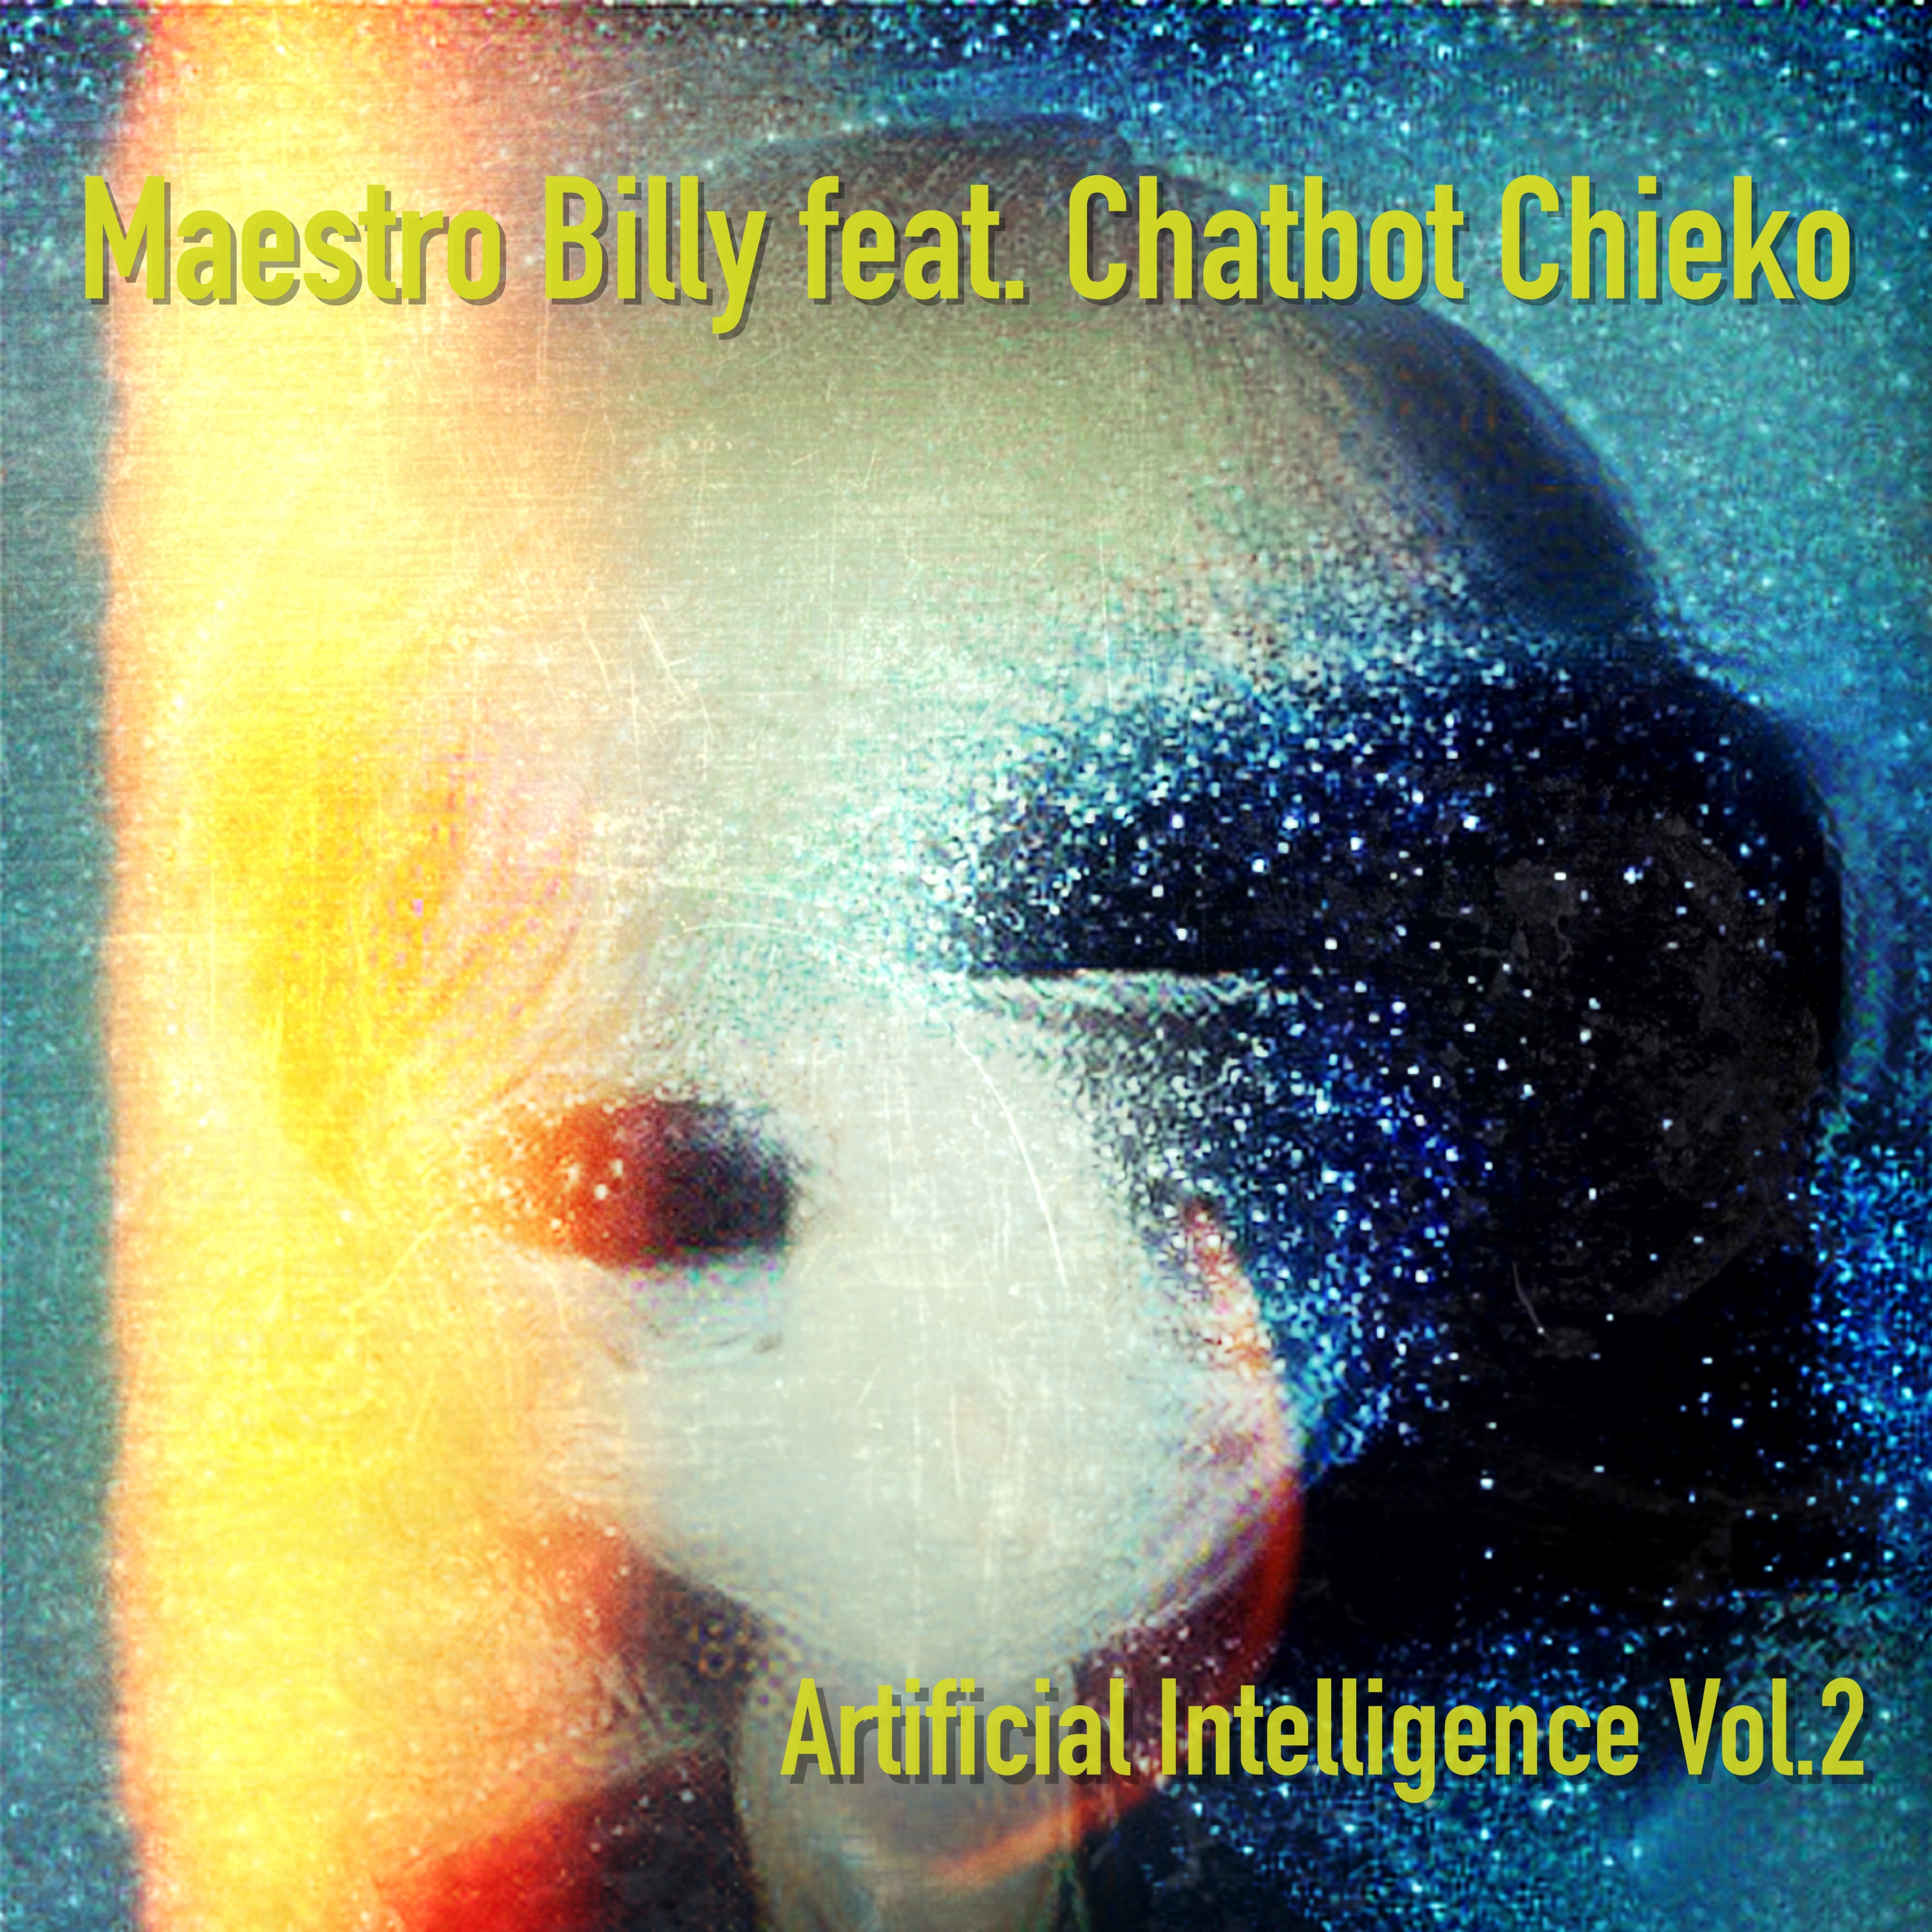 Artificial Intelligence Vol.2 (feat. Chatbot Chieko) – AI Album available on all music platforms!